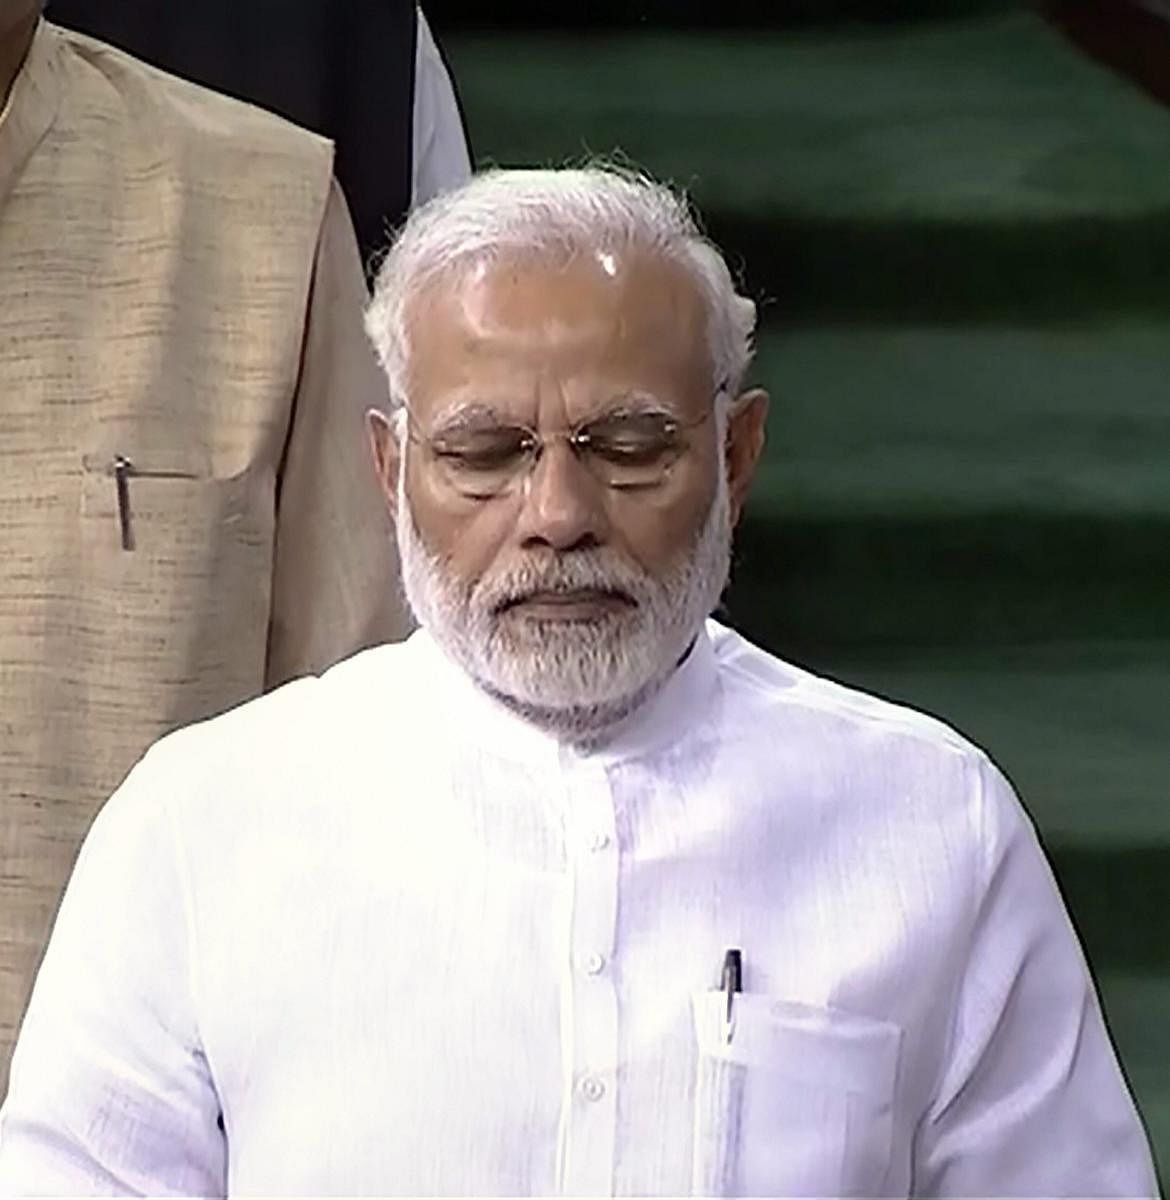 While congratulating the winner in the House, Modi made some remarks which were found to be objectionable by Opposition MPs.